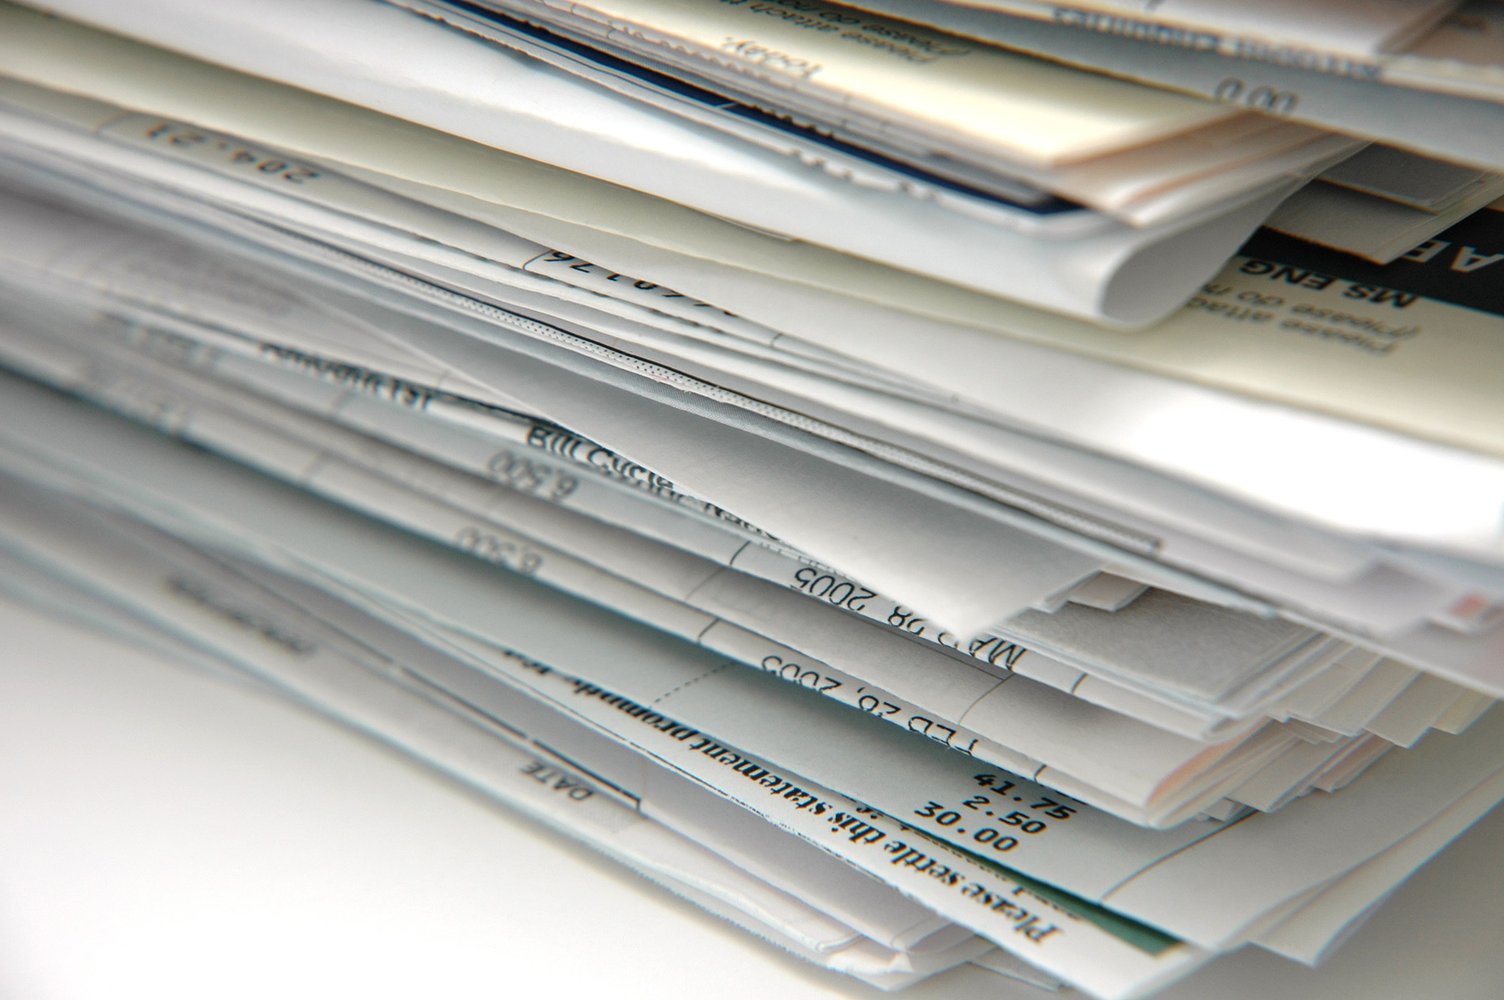 Case Study: The Journey From 180,000 Paper Invoices to a Digital Supply Chain